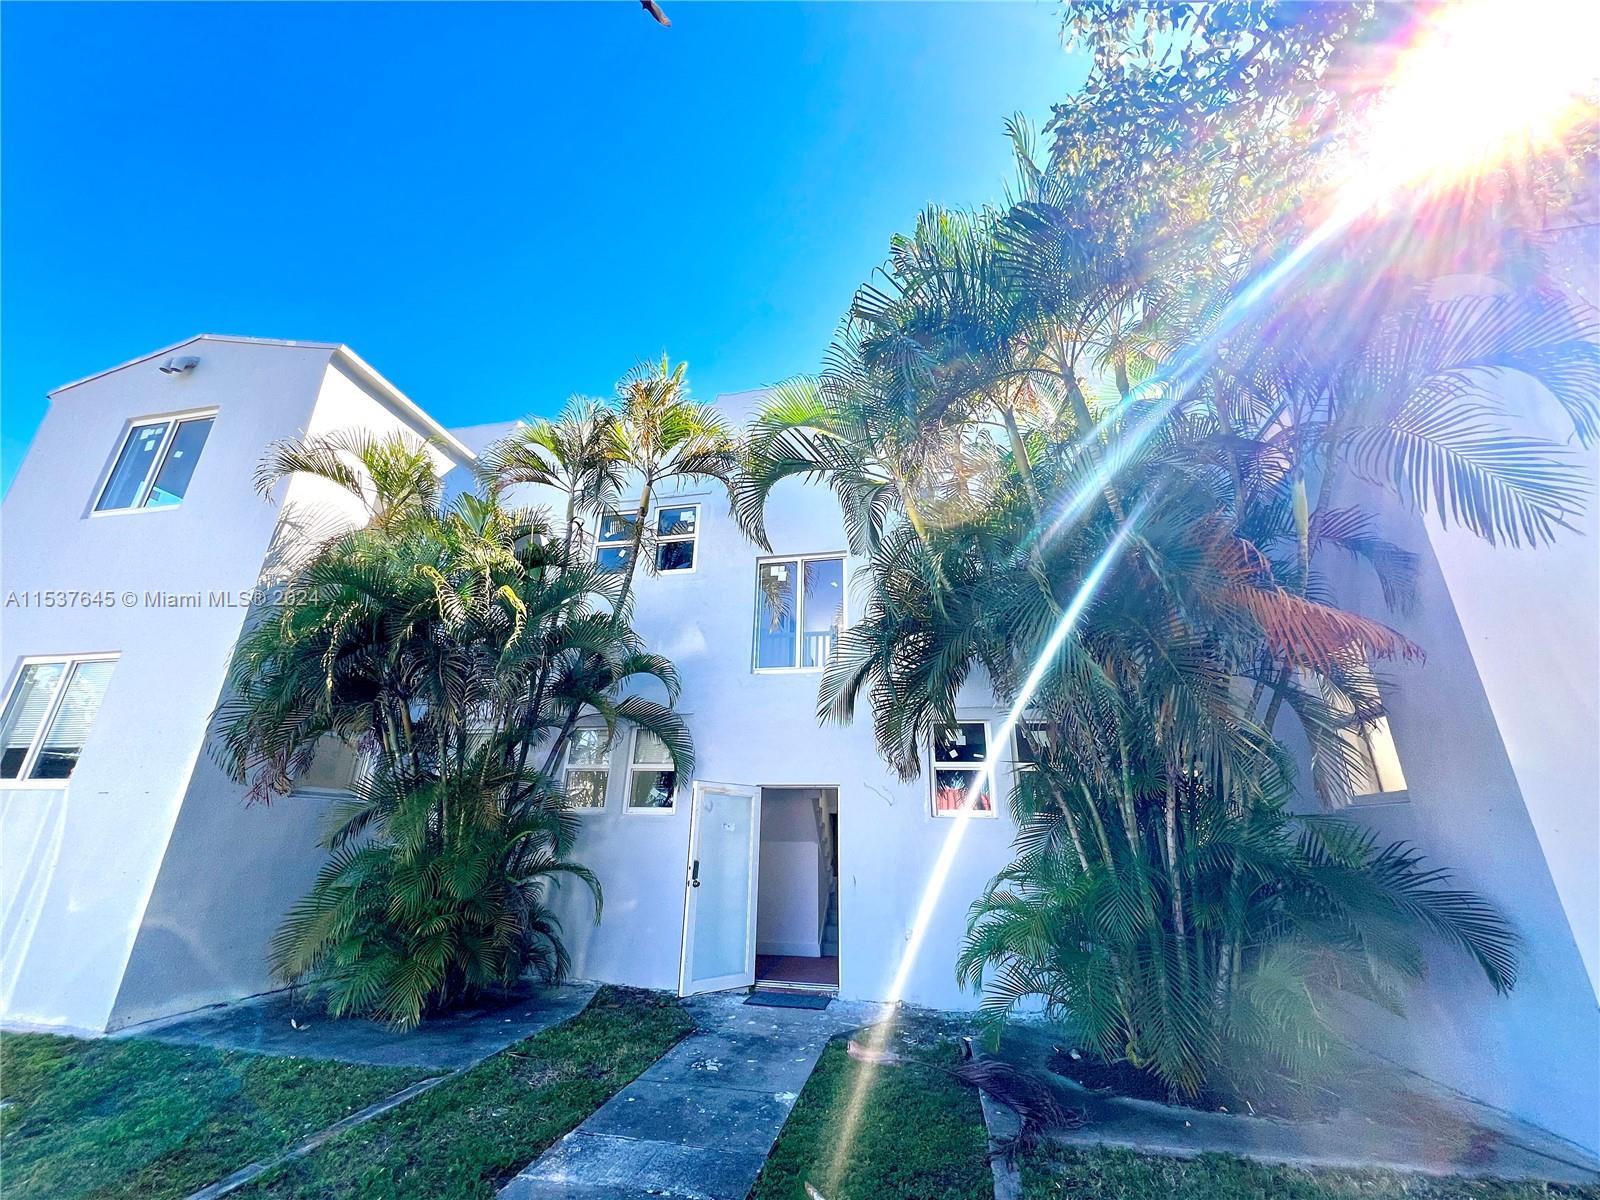 Photo of 1015 S 17th Ave #5 in Hollywood, FL